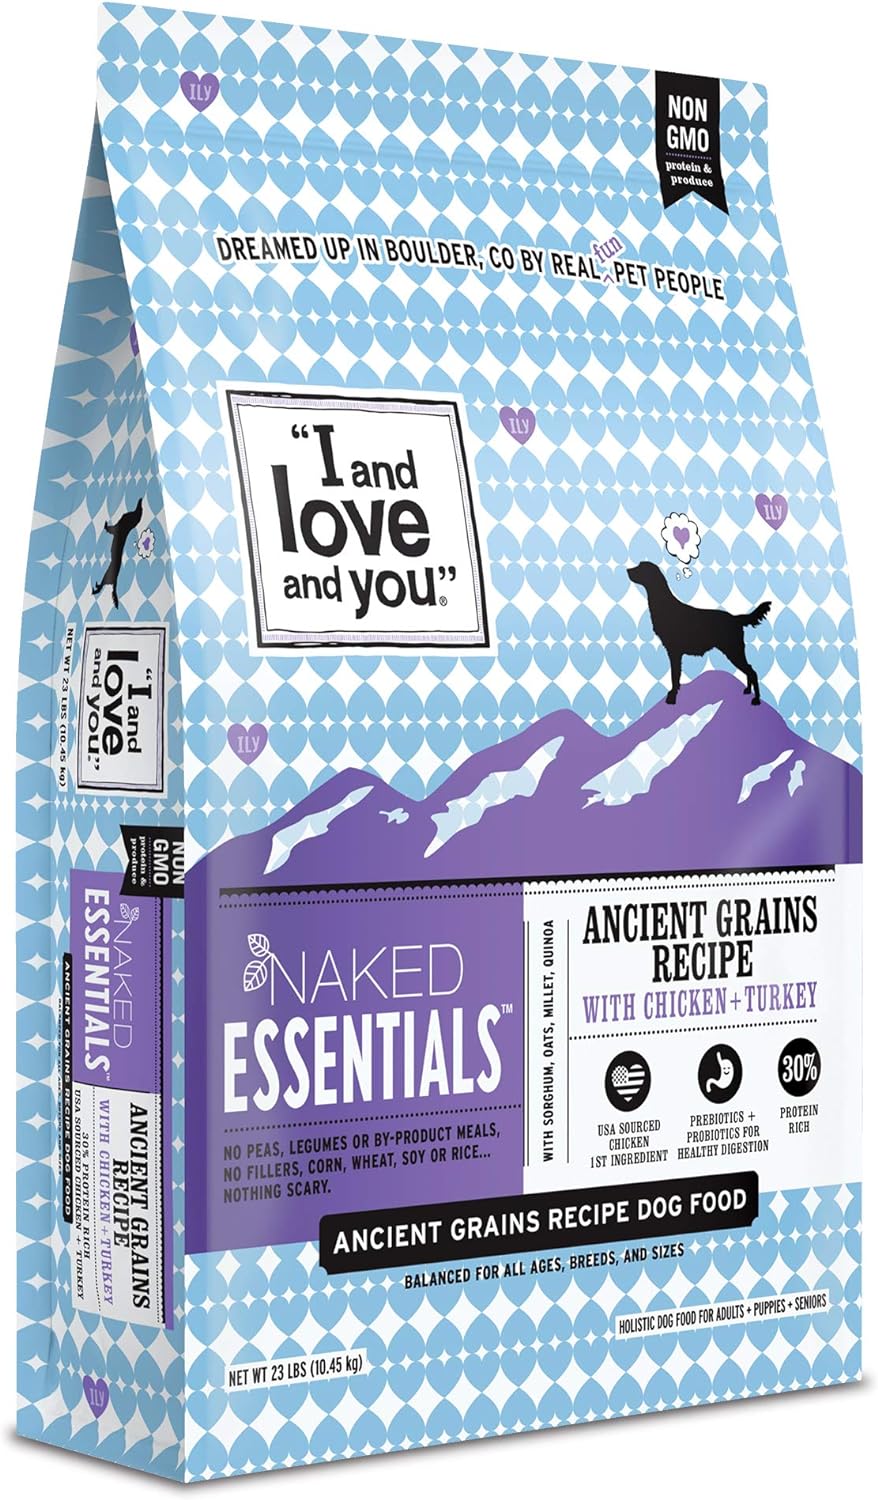 I and love and you Naked Essentials Ancient Grains Dry Dog Food - Chicken + Turkey - High Protein, Real Meat, No Fillers, 23lb Bag